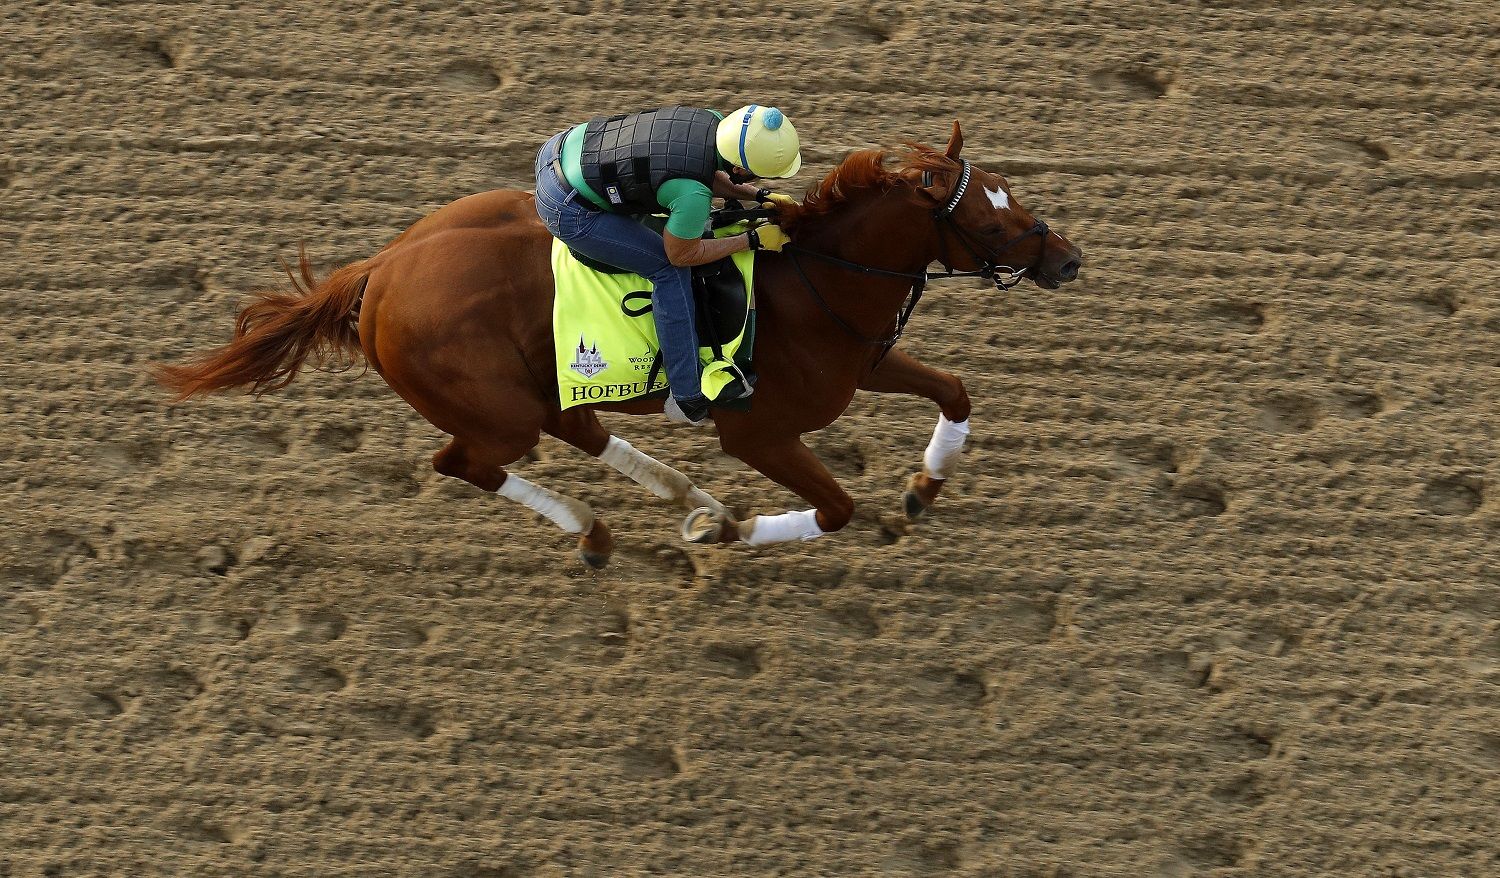 Kentucky Derby entrant Hofburg runs during a morning workout at Churchill Downs Wednesday, May 2, 2018, in Louisville, Ky. The 144th running of the Kentucky Derby is scheduled for Saturday, May 5. (AP Photo/Charlie Riedel)